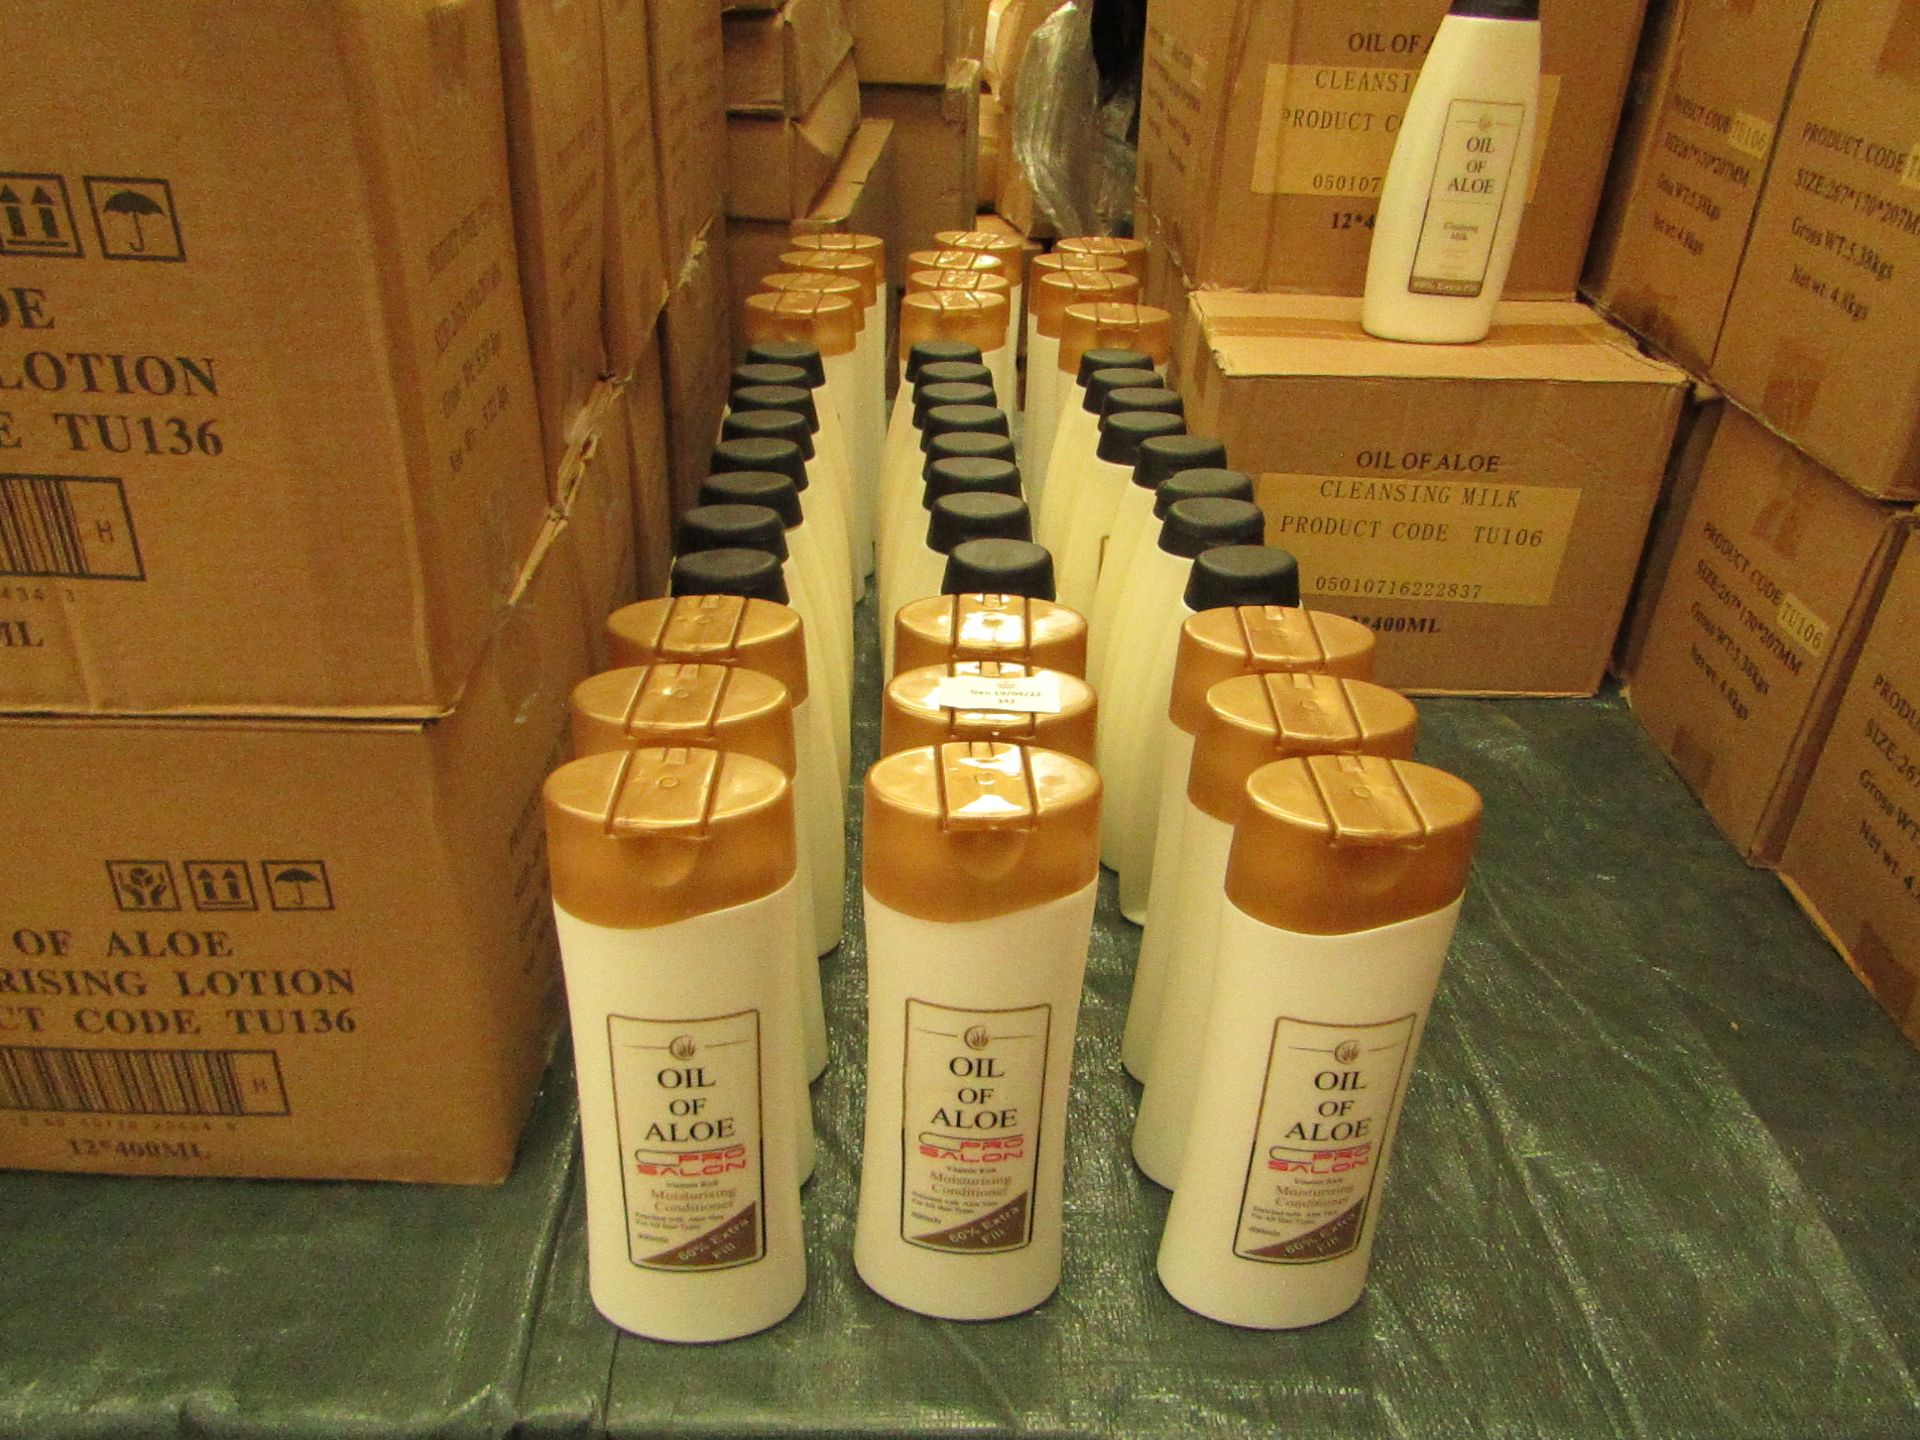 24x OIL OF ALOE - Cleansing Milk Enriched With Aloe Vera - 400ml - New.